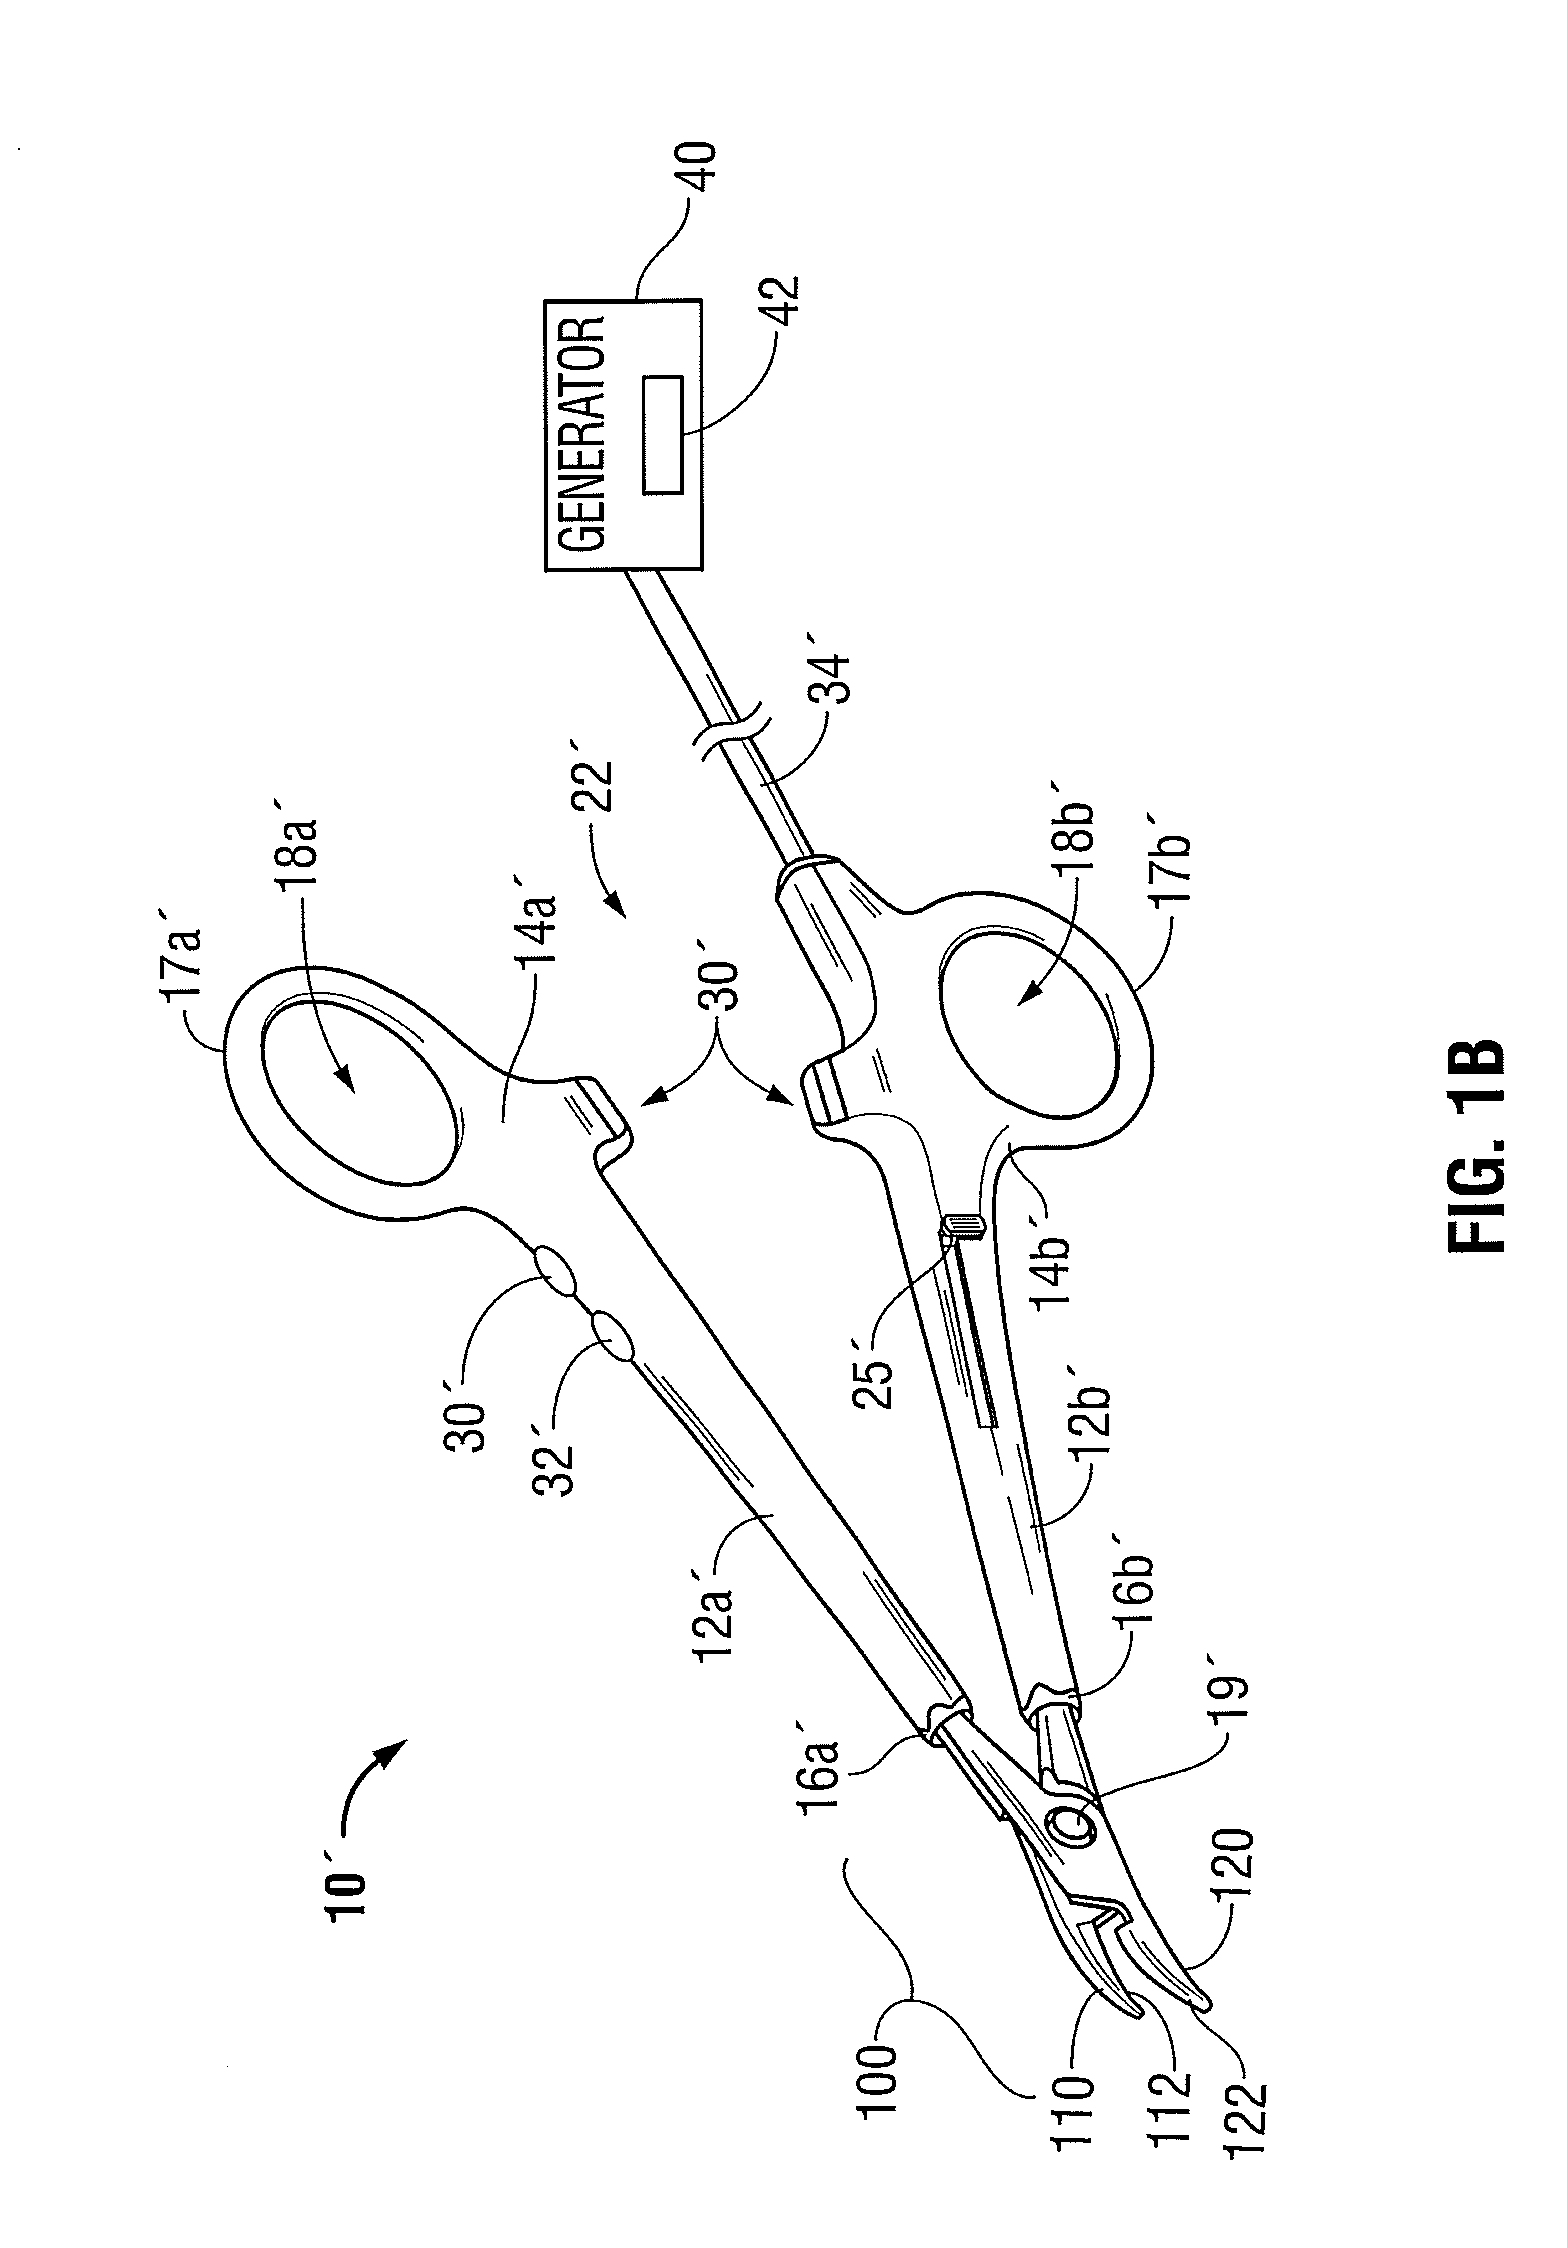 Light Energy Sealing, Cutting and Sensing Surgical Device